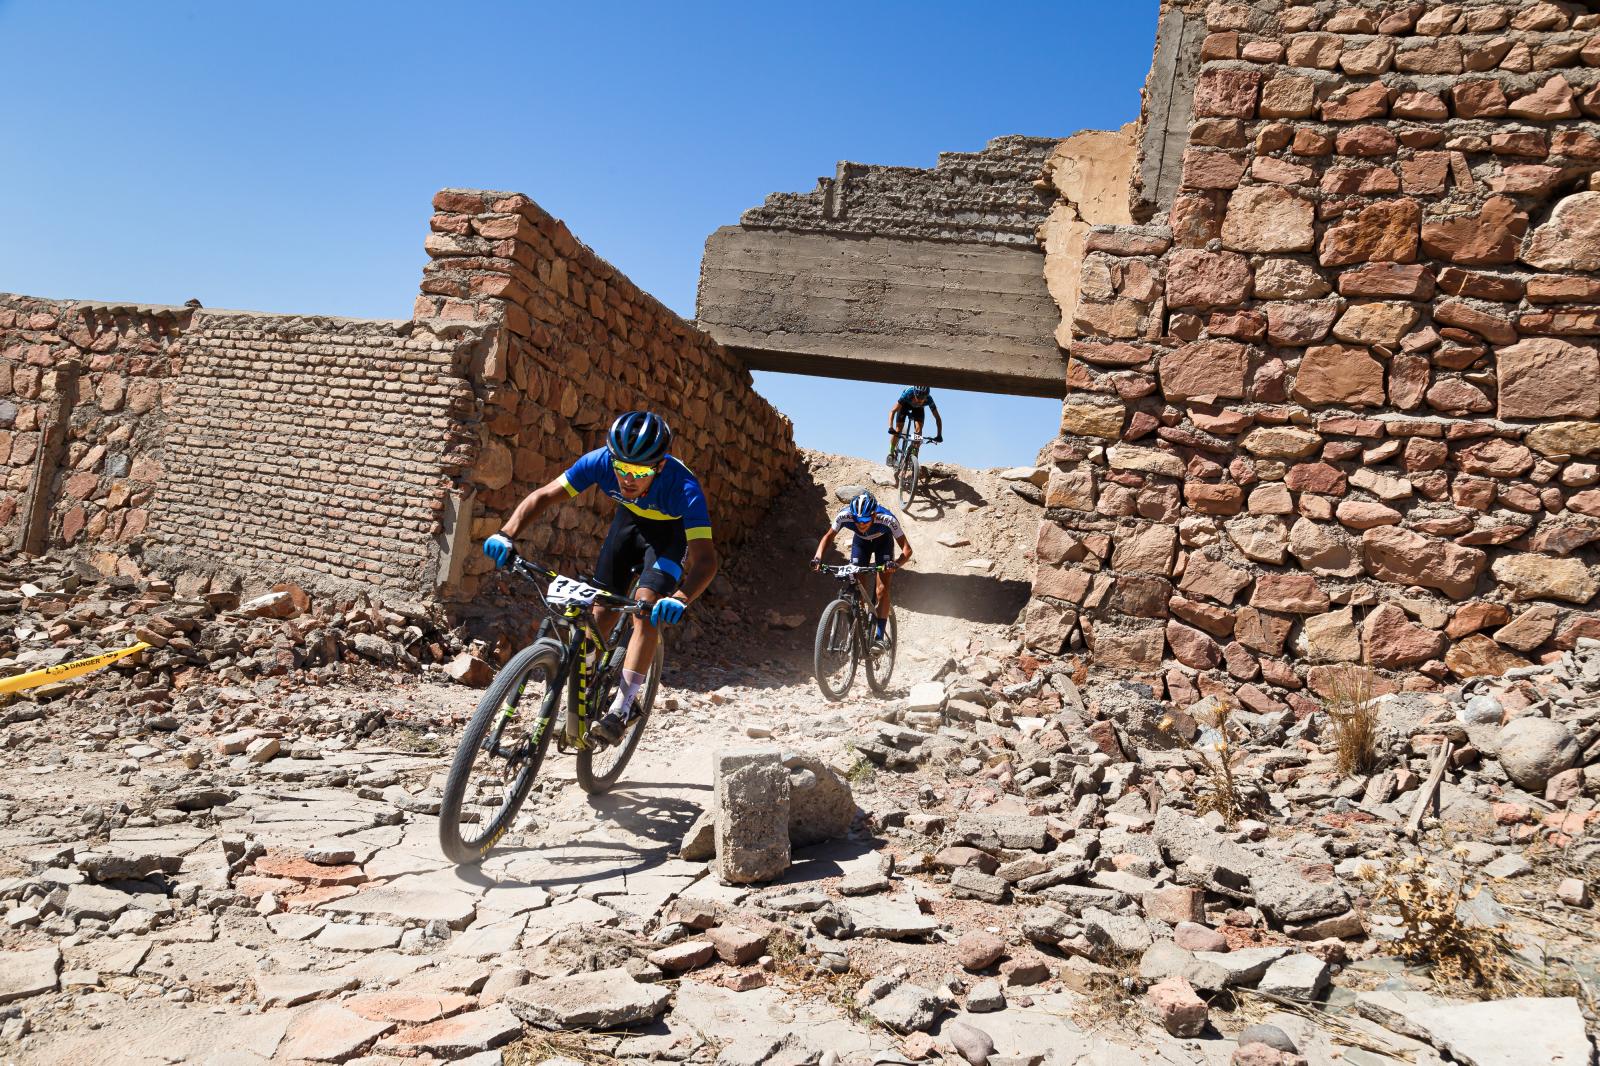 Image from Sport - Cross country mountain bike race. Cross-country races are...